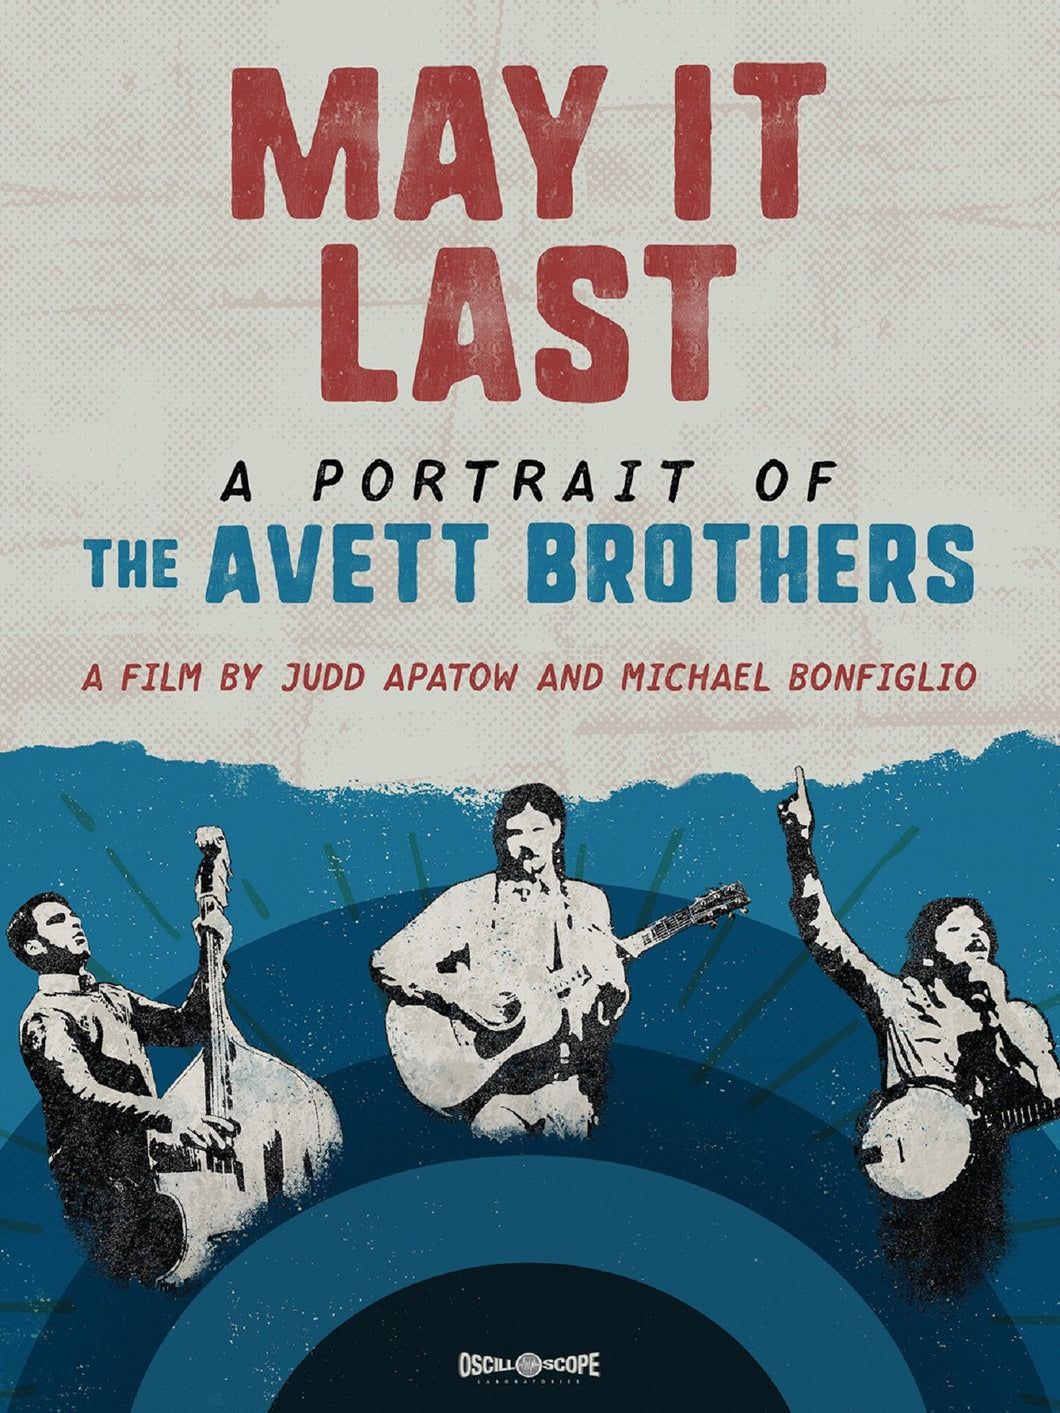 Avett Brothers - May It Last: A Portrait Of The Avett Brothers (DVD)